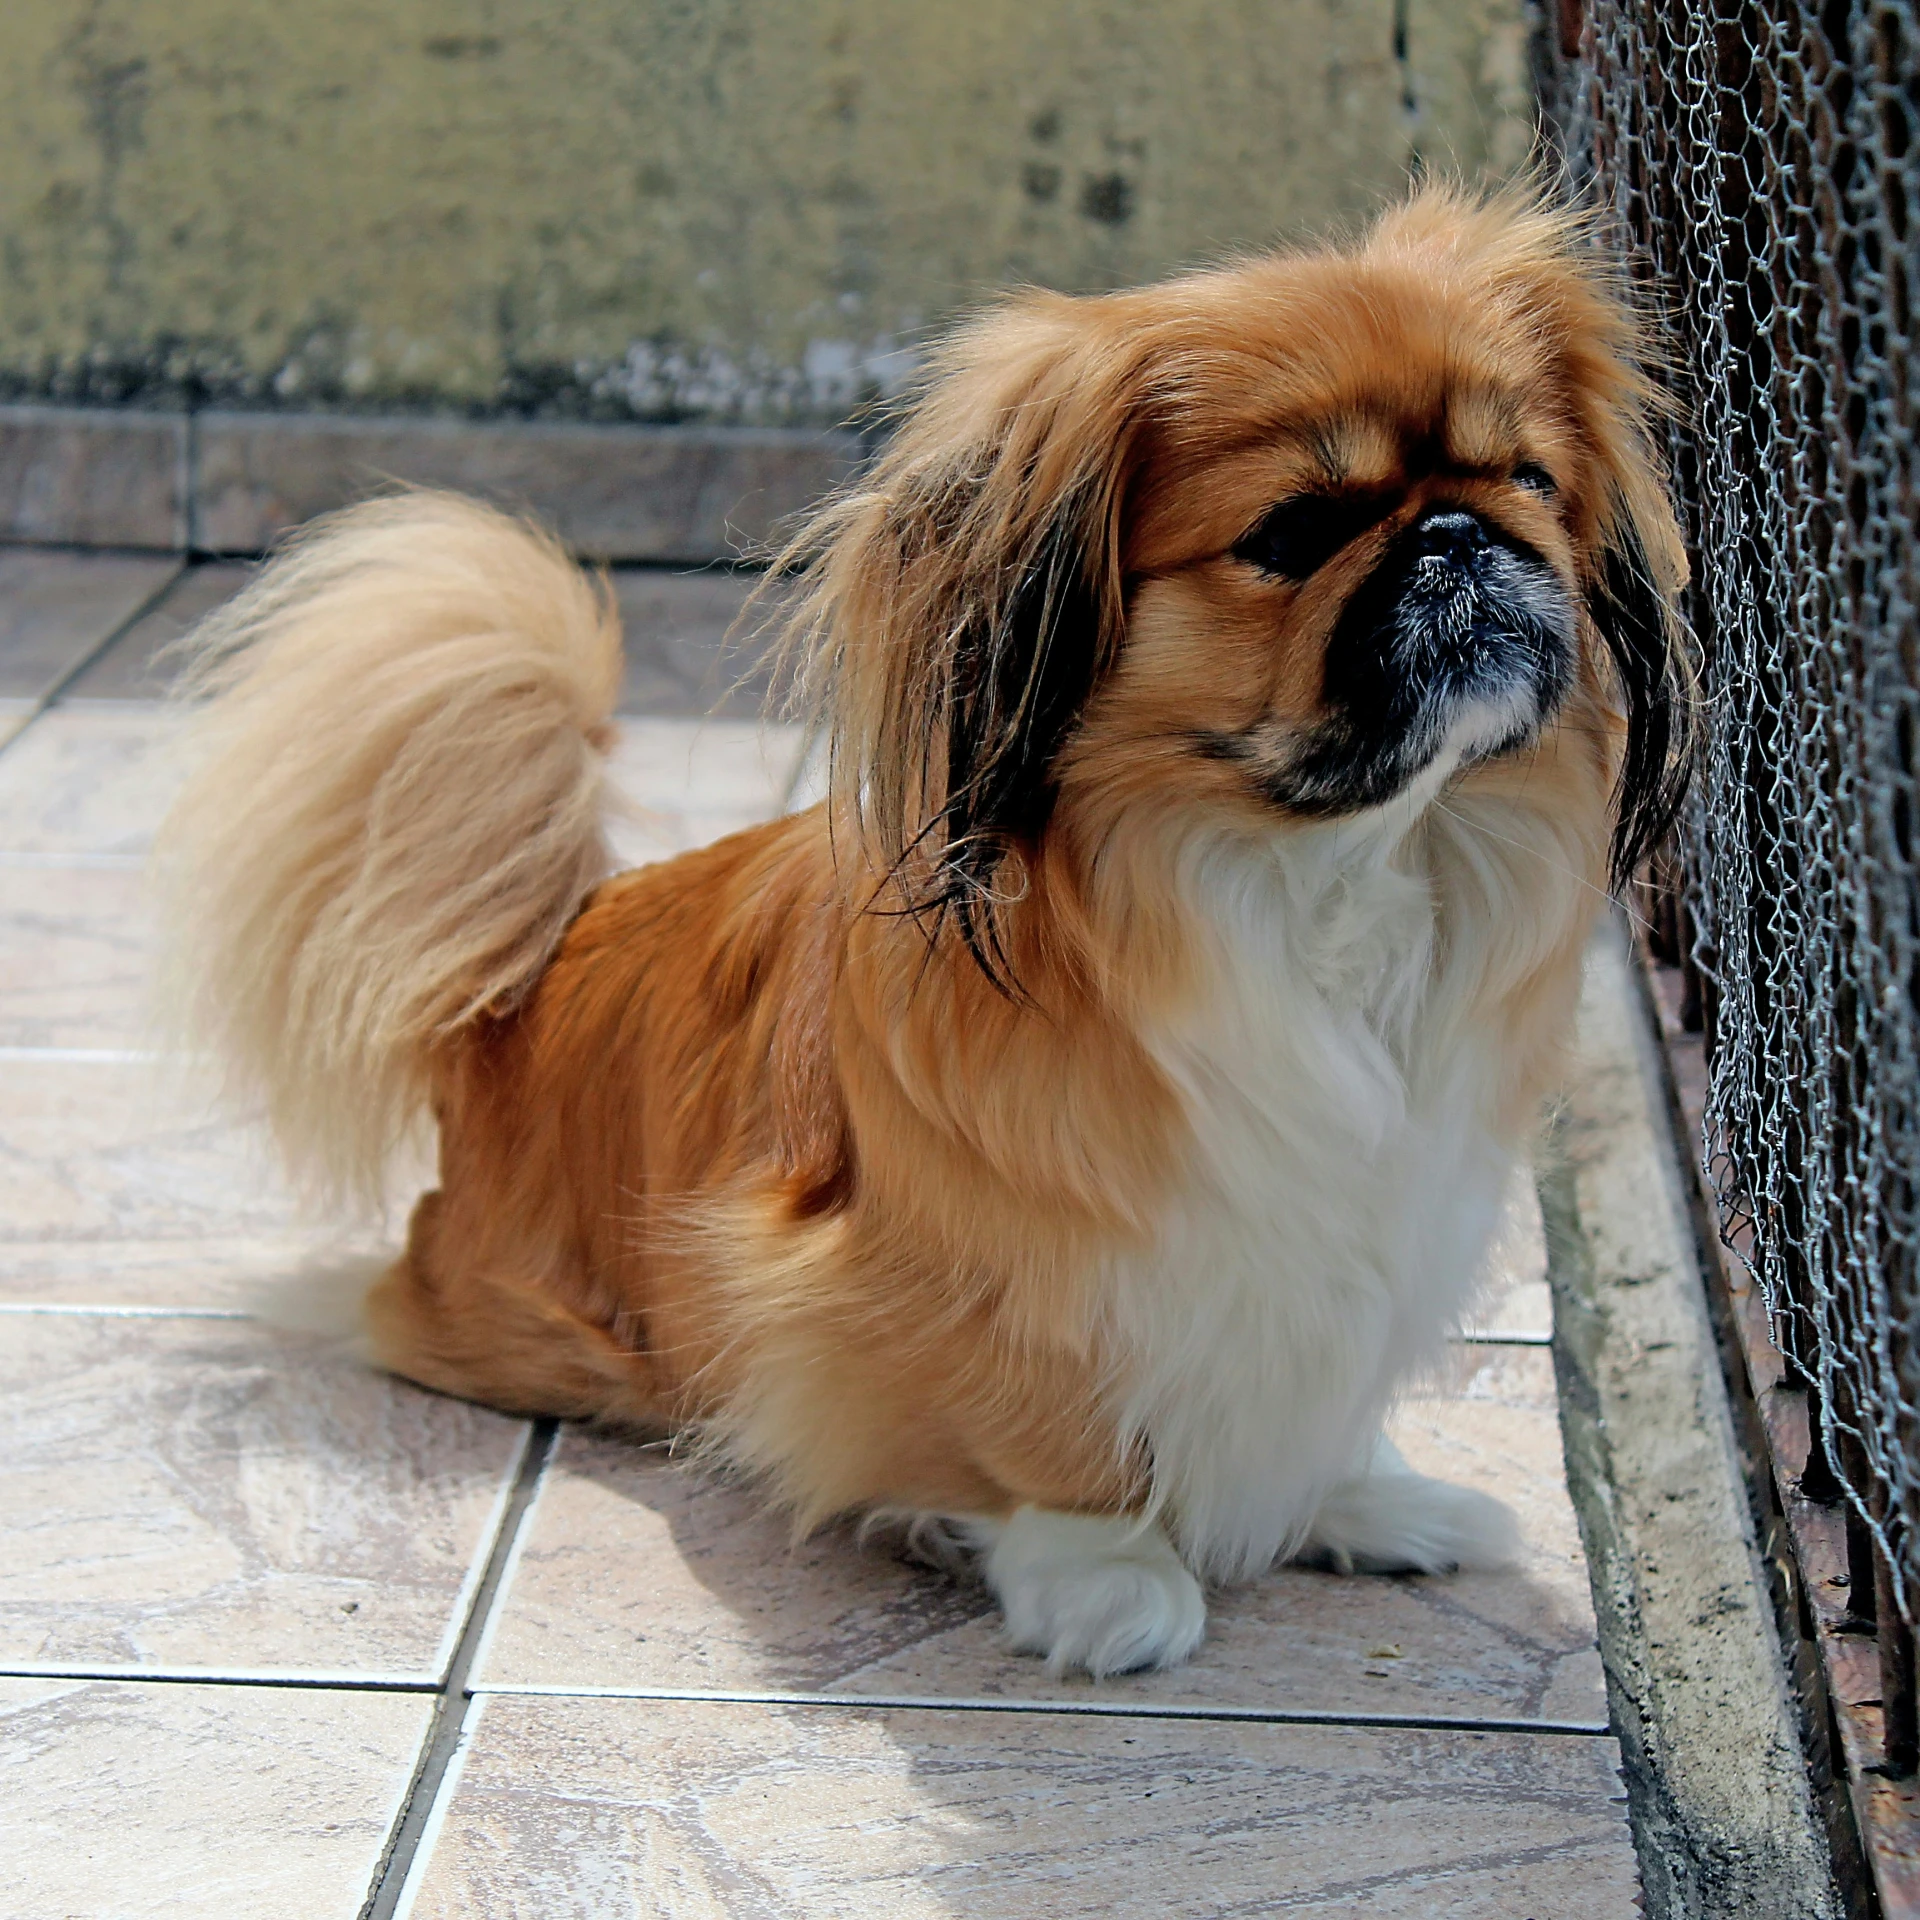 a small brown and white dog standing next to a metal fence